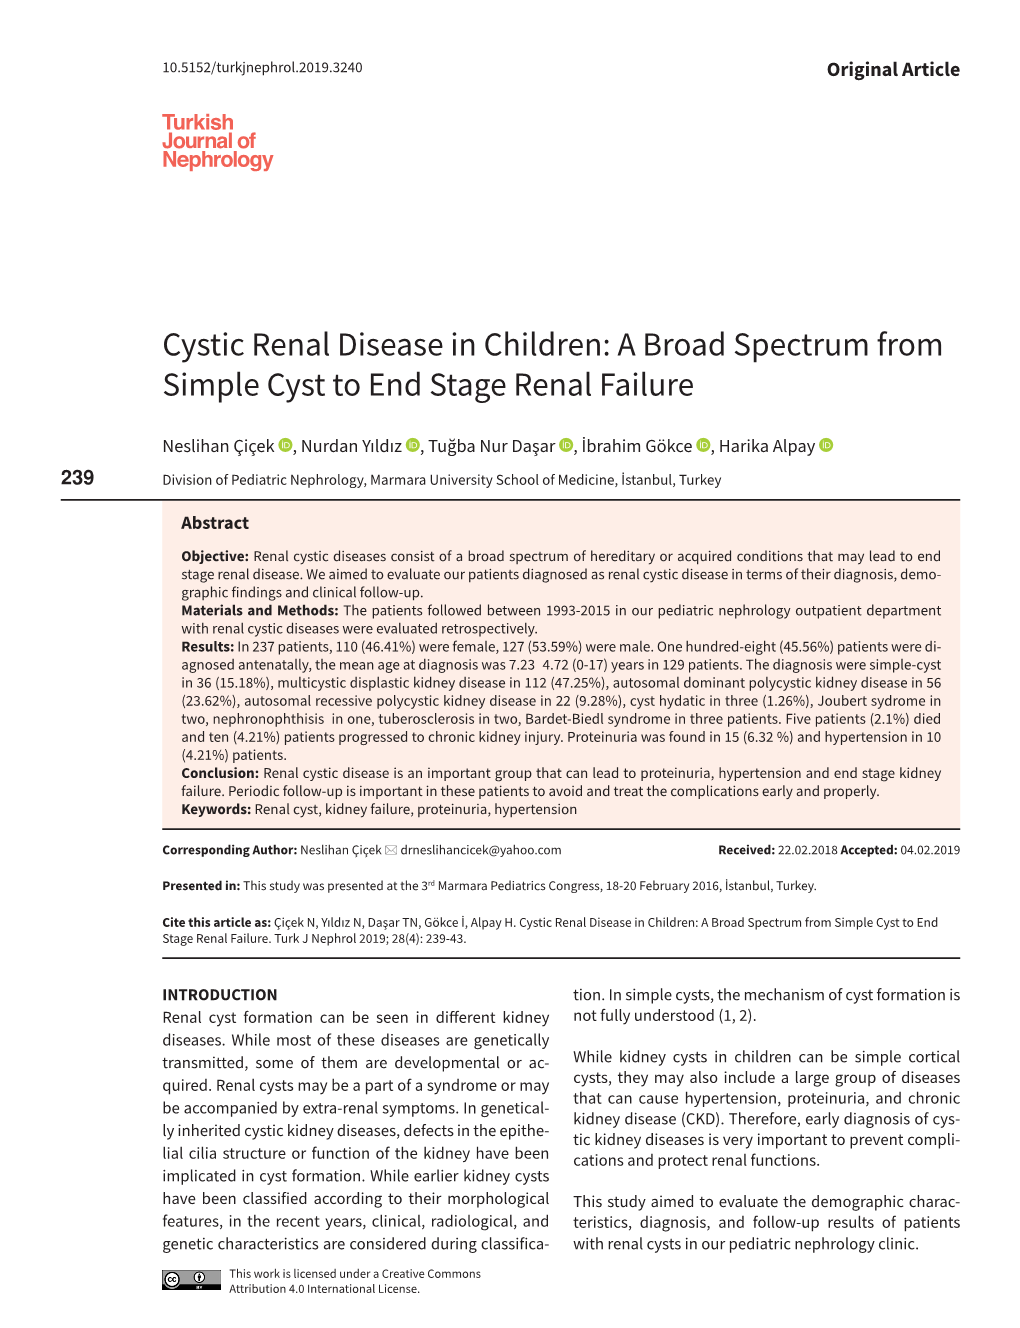 Cystic Renal Disease in Children: a Broad Spectrum from Simple Cyst to End Stage Renal Failure